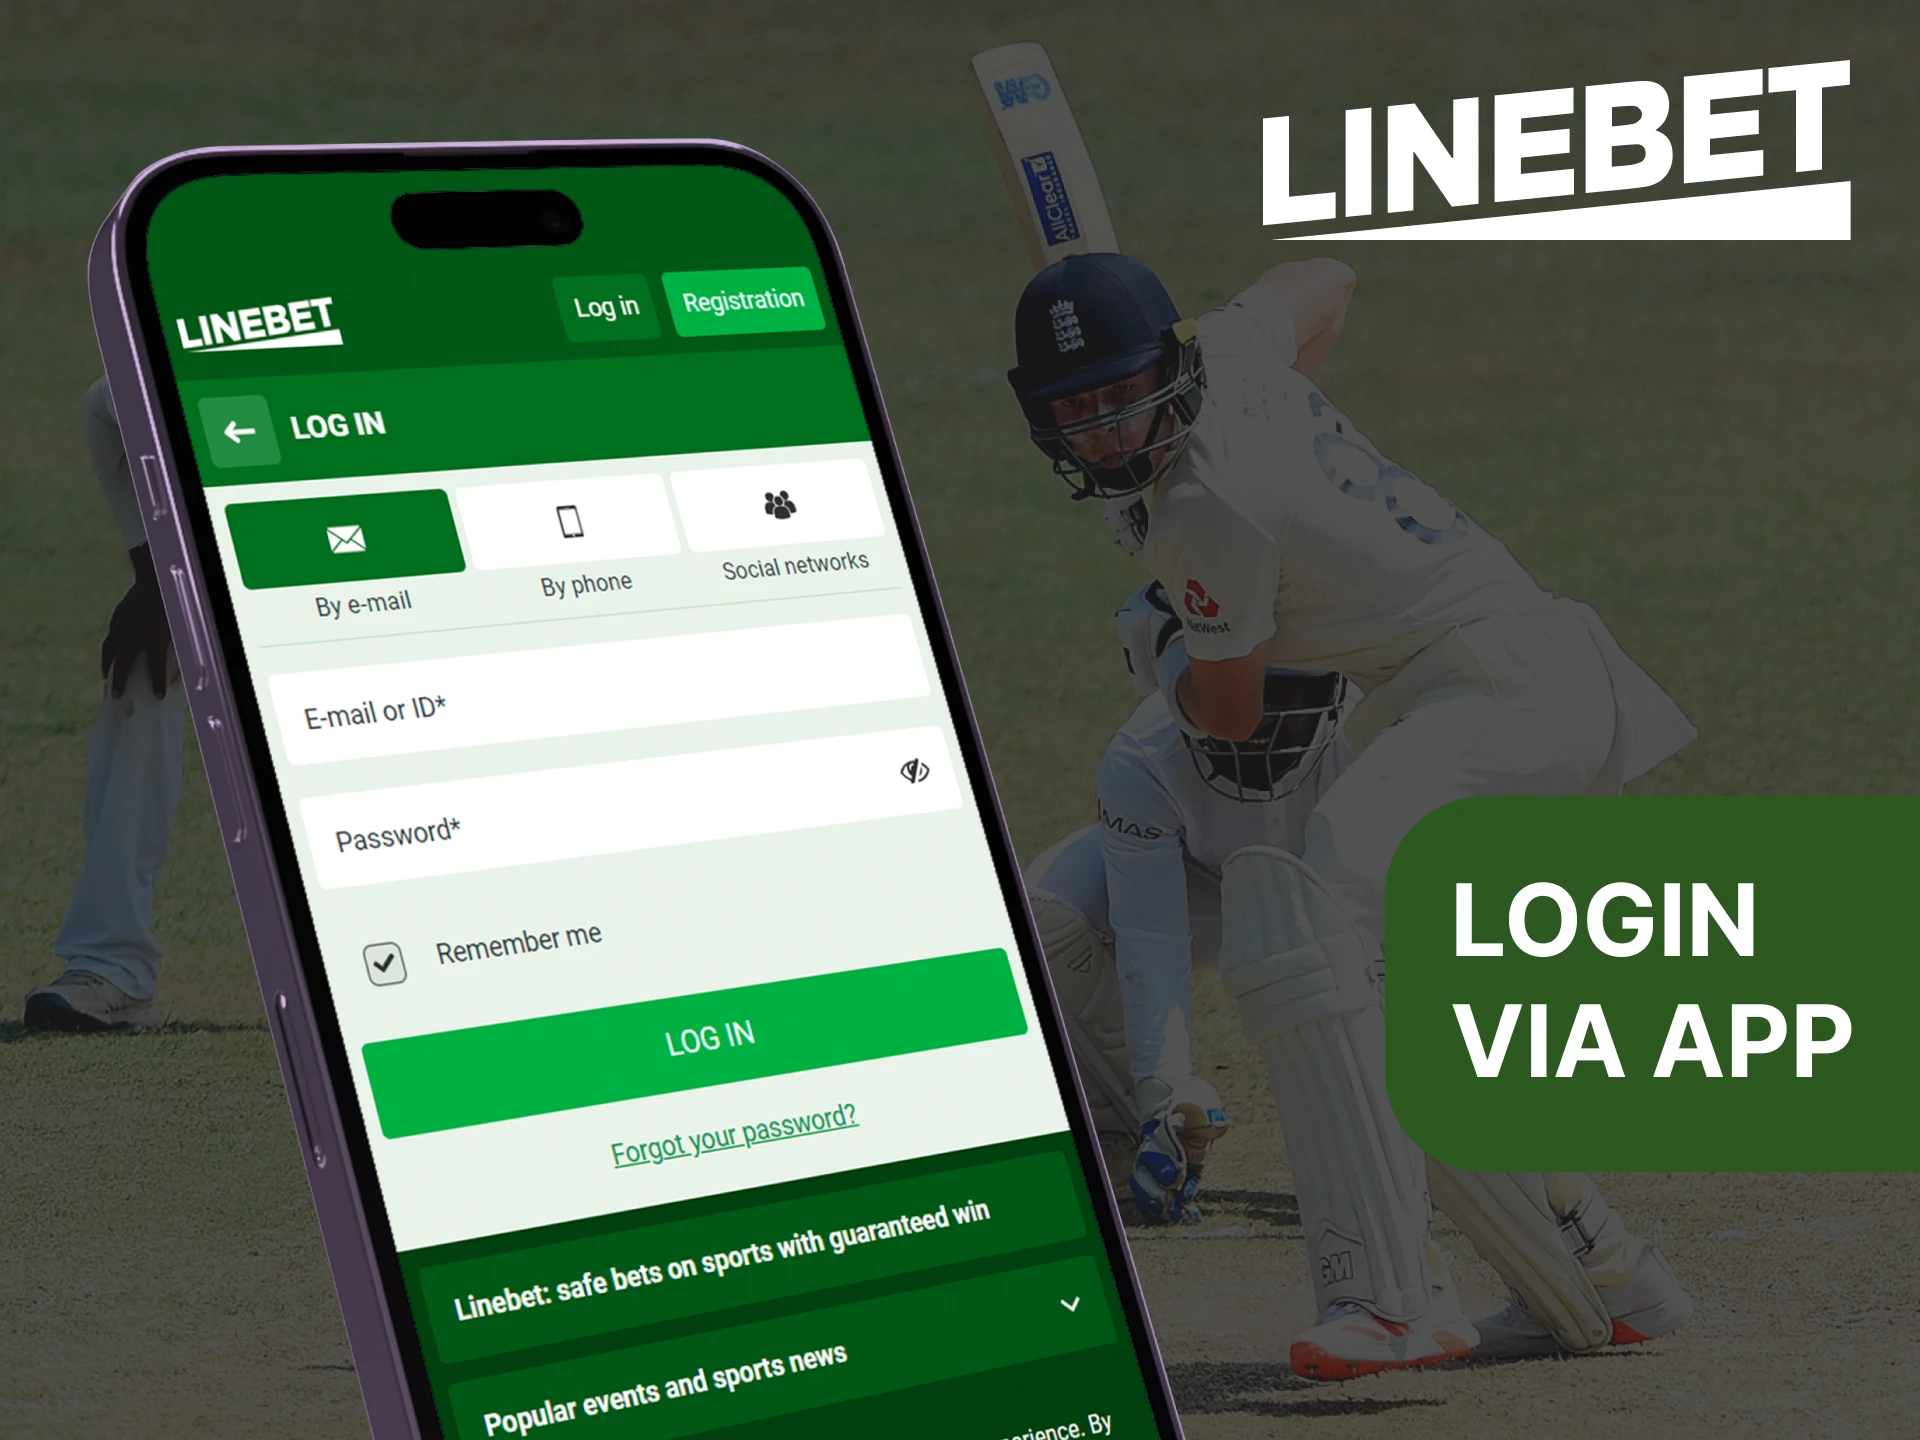 You can log into your existing Linebet account on the mobile app.